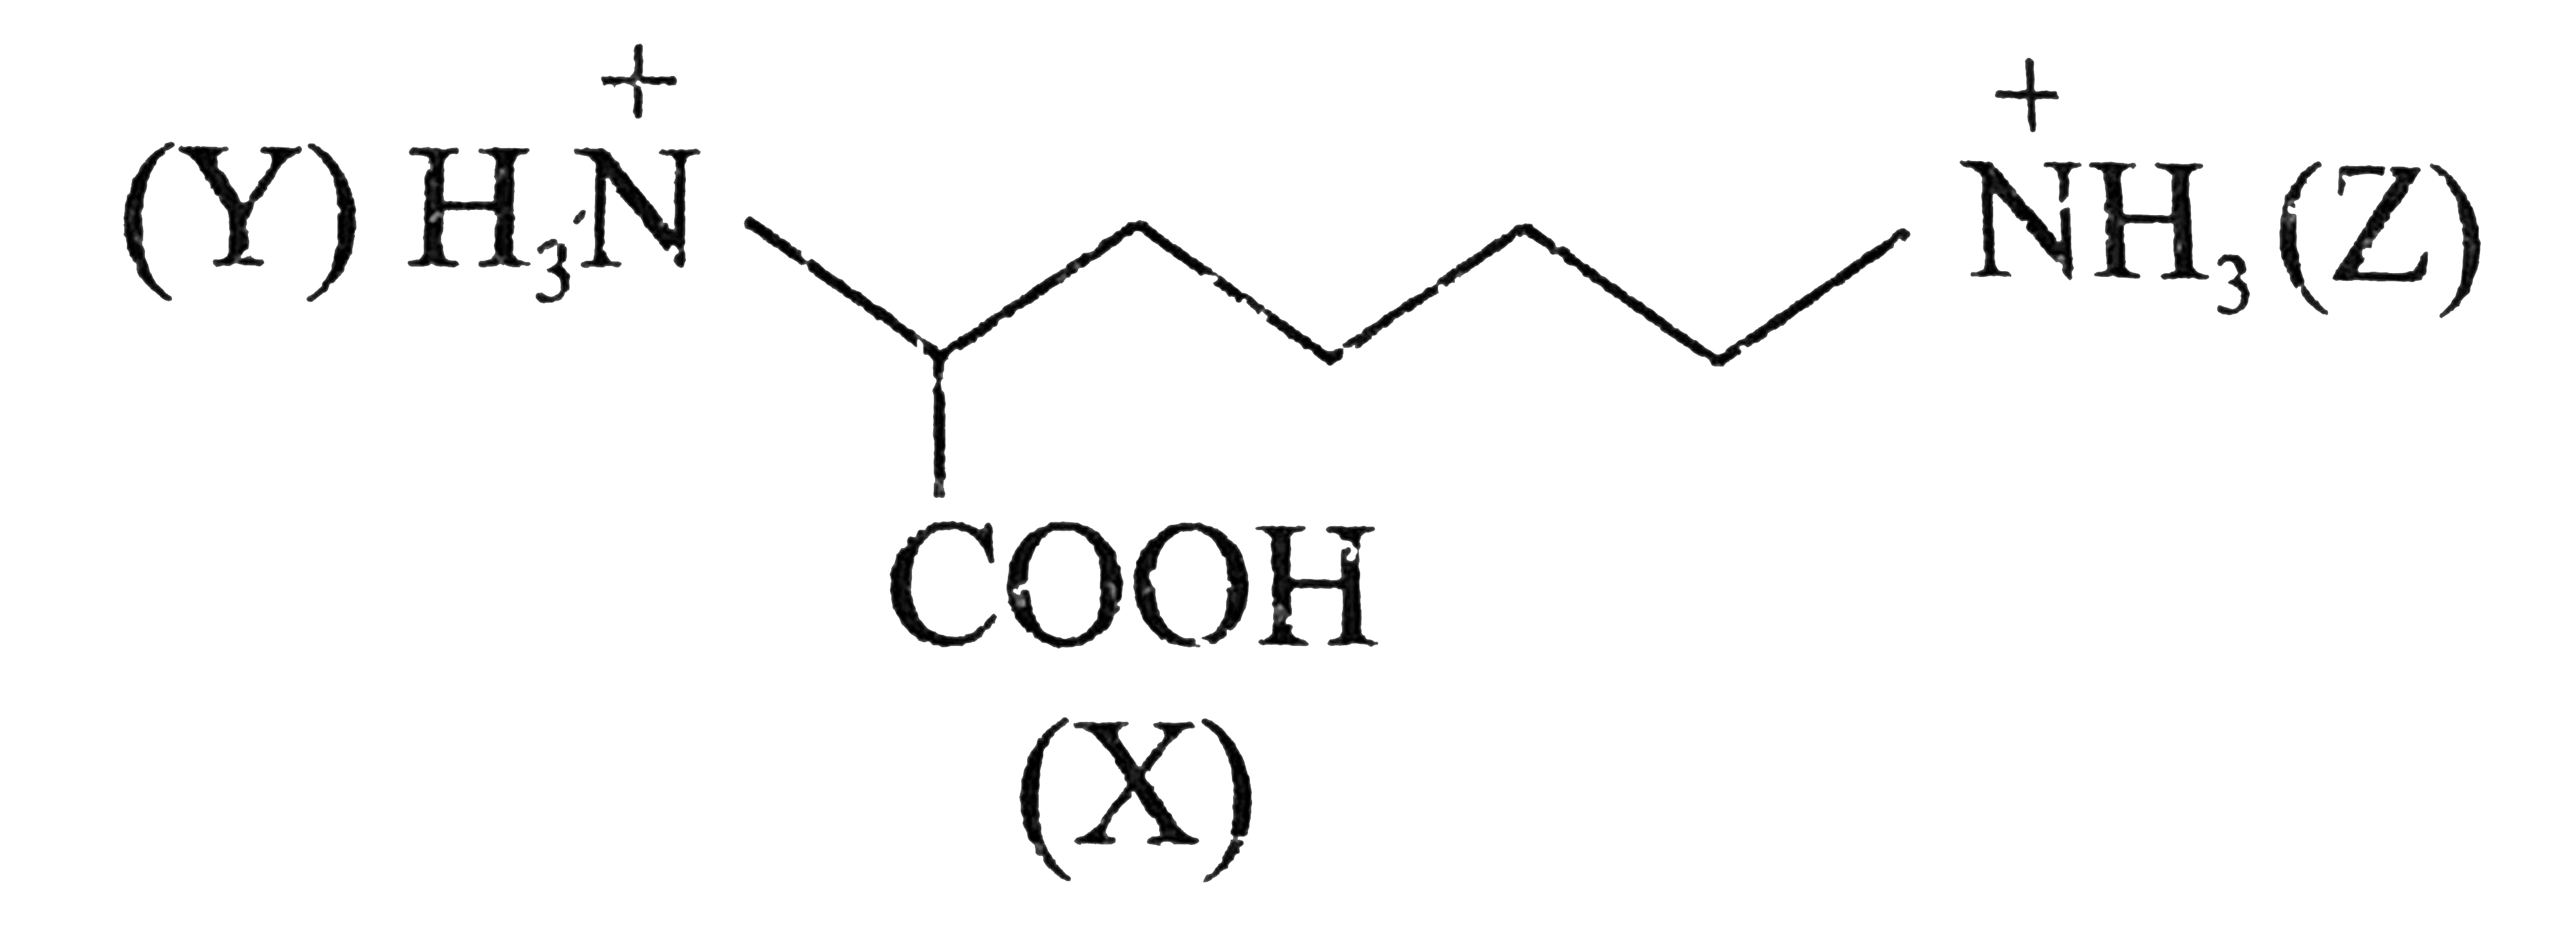 The following species has three acidic sites, namely -COOH (denoted as site X) -overset(+)NH(3) at C - 2 (denoted as site Y) and -overset(+)NH(3) at C - 6 (denoted as site Z)   the order of decreasing acidity of these acidic sites is